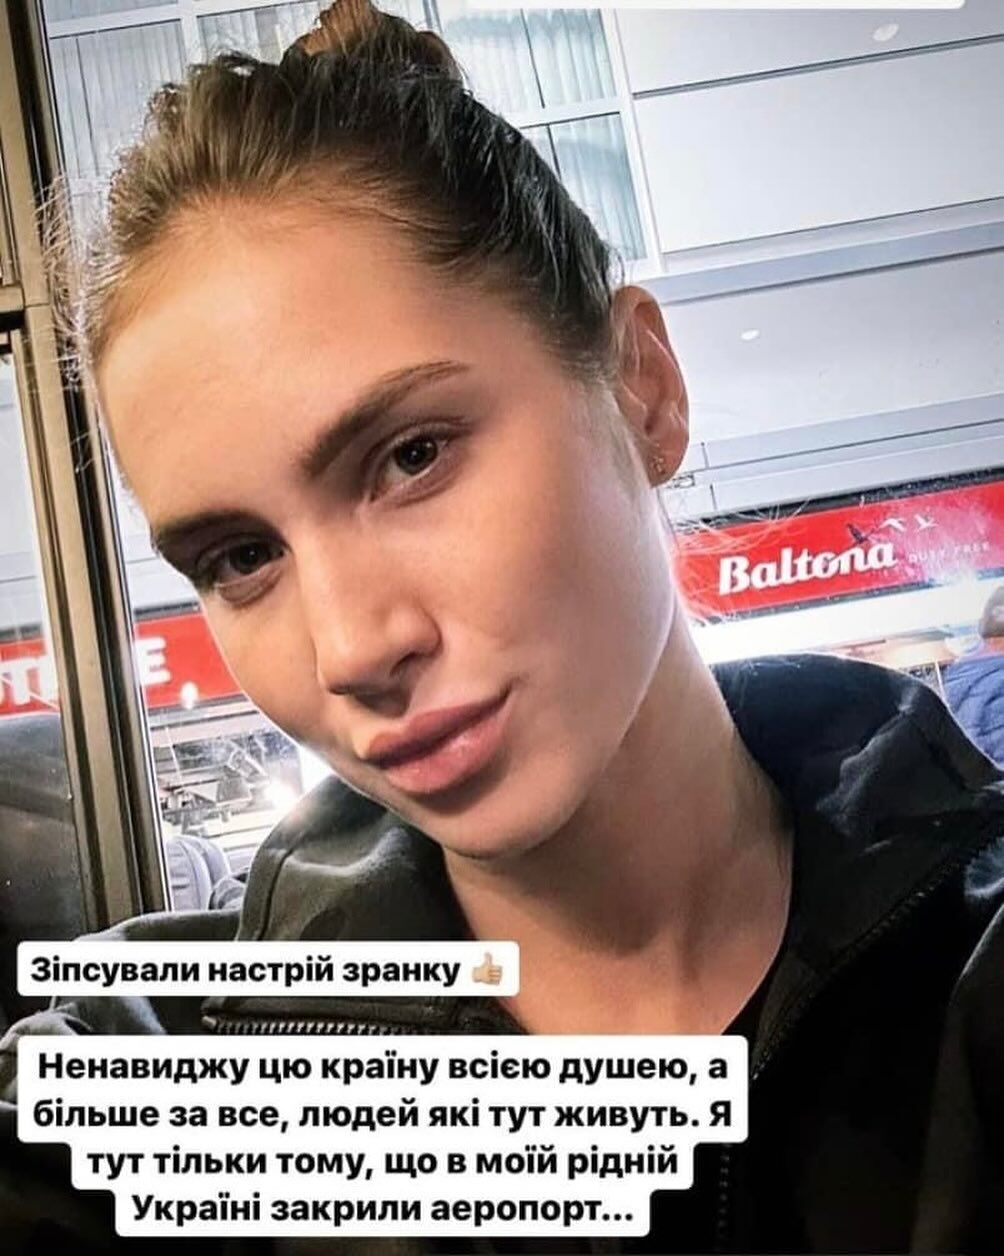 ''I hate this country with all my soul''. A famous gymnast was kicked out of the Ukrainian national team after her insulting words about Poland